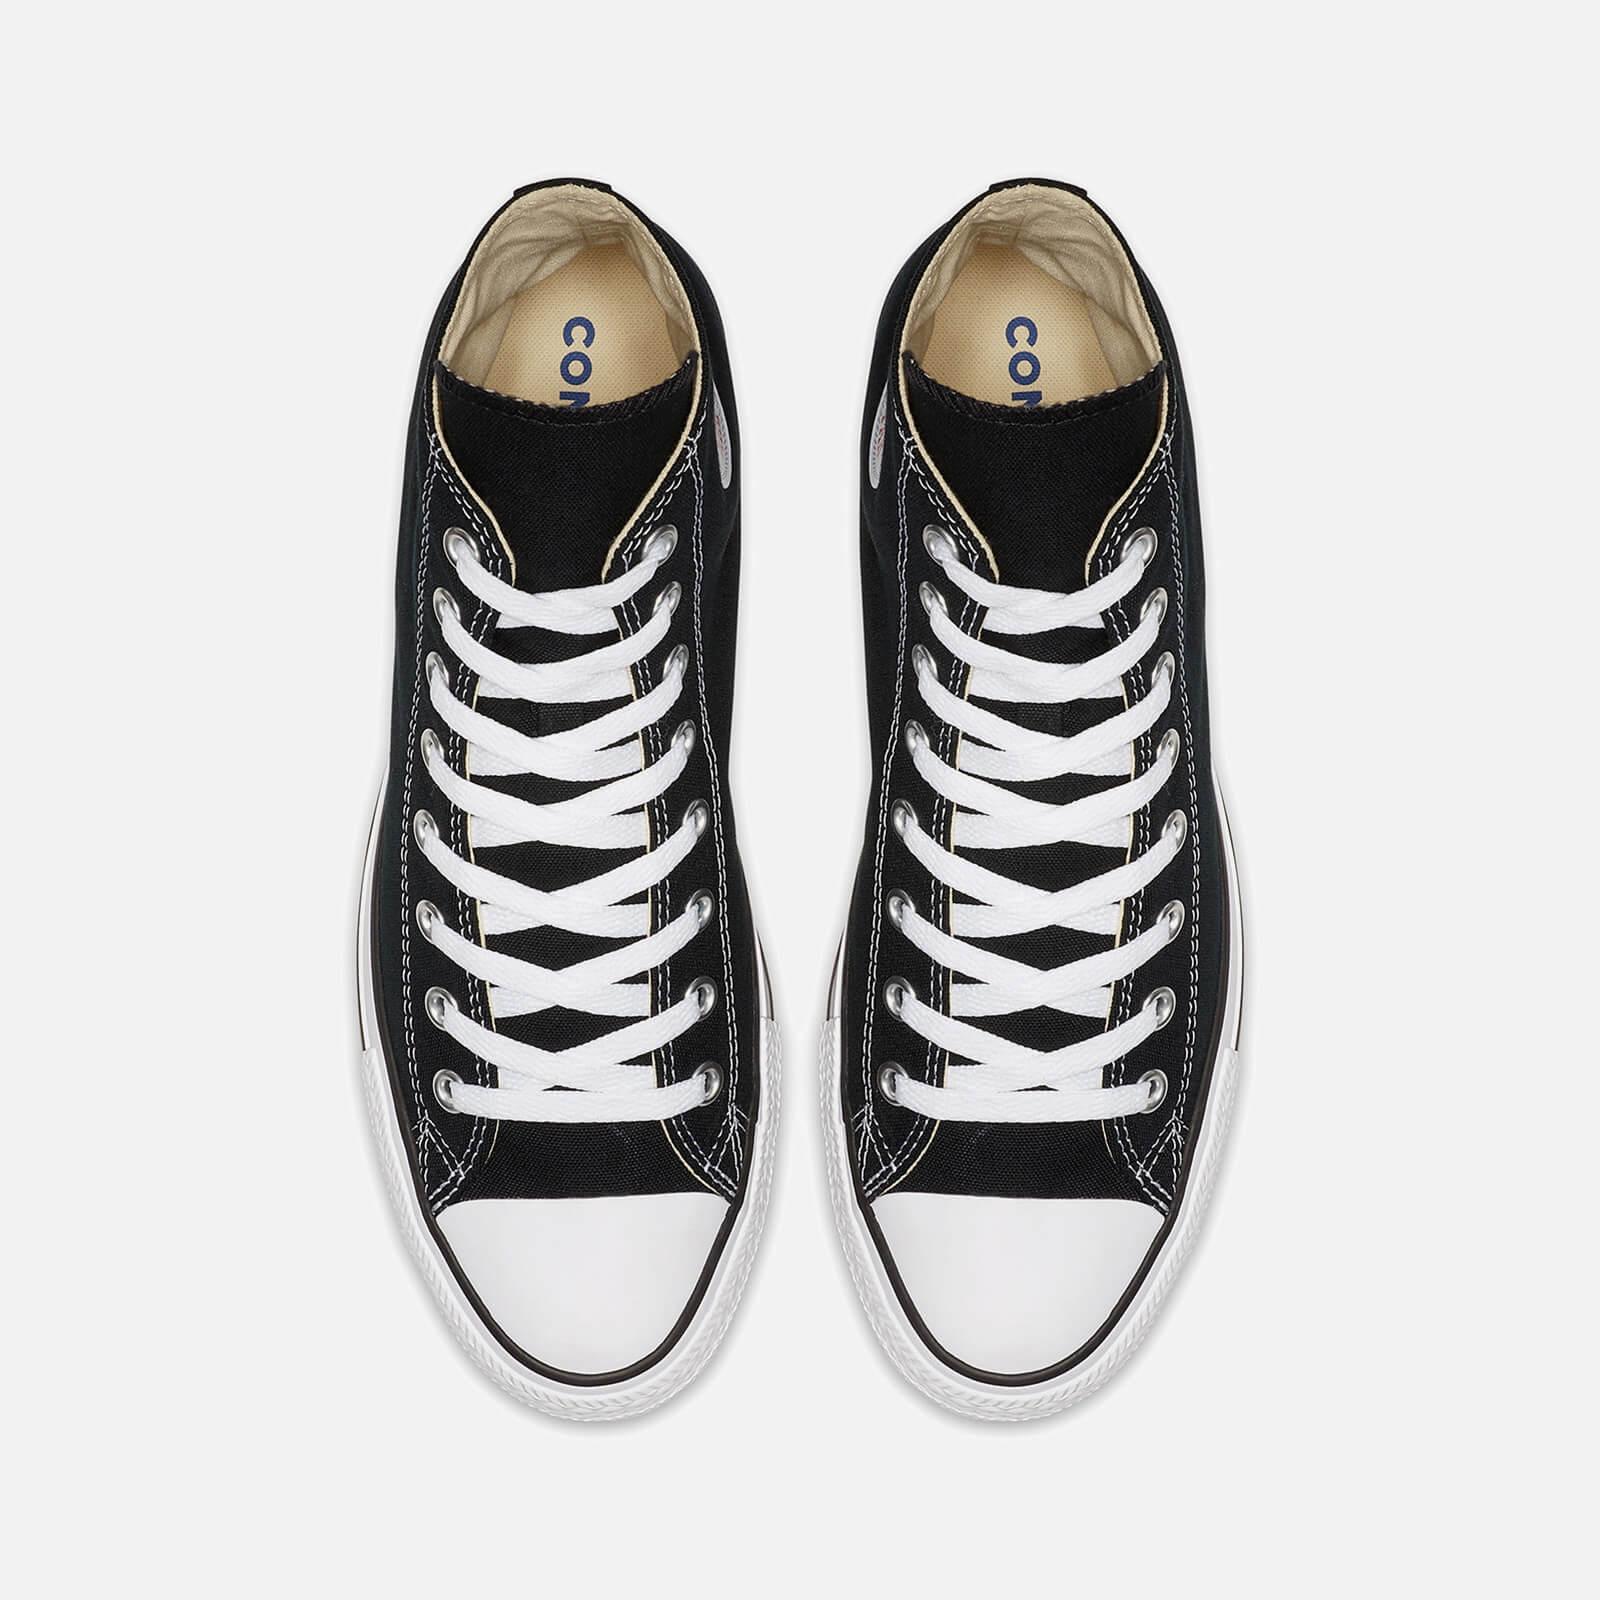 spin Green beans waste away Converse Canvas Chuck Taylor All Star Hi-top Trainers in Black | Lyst